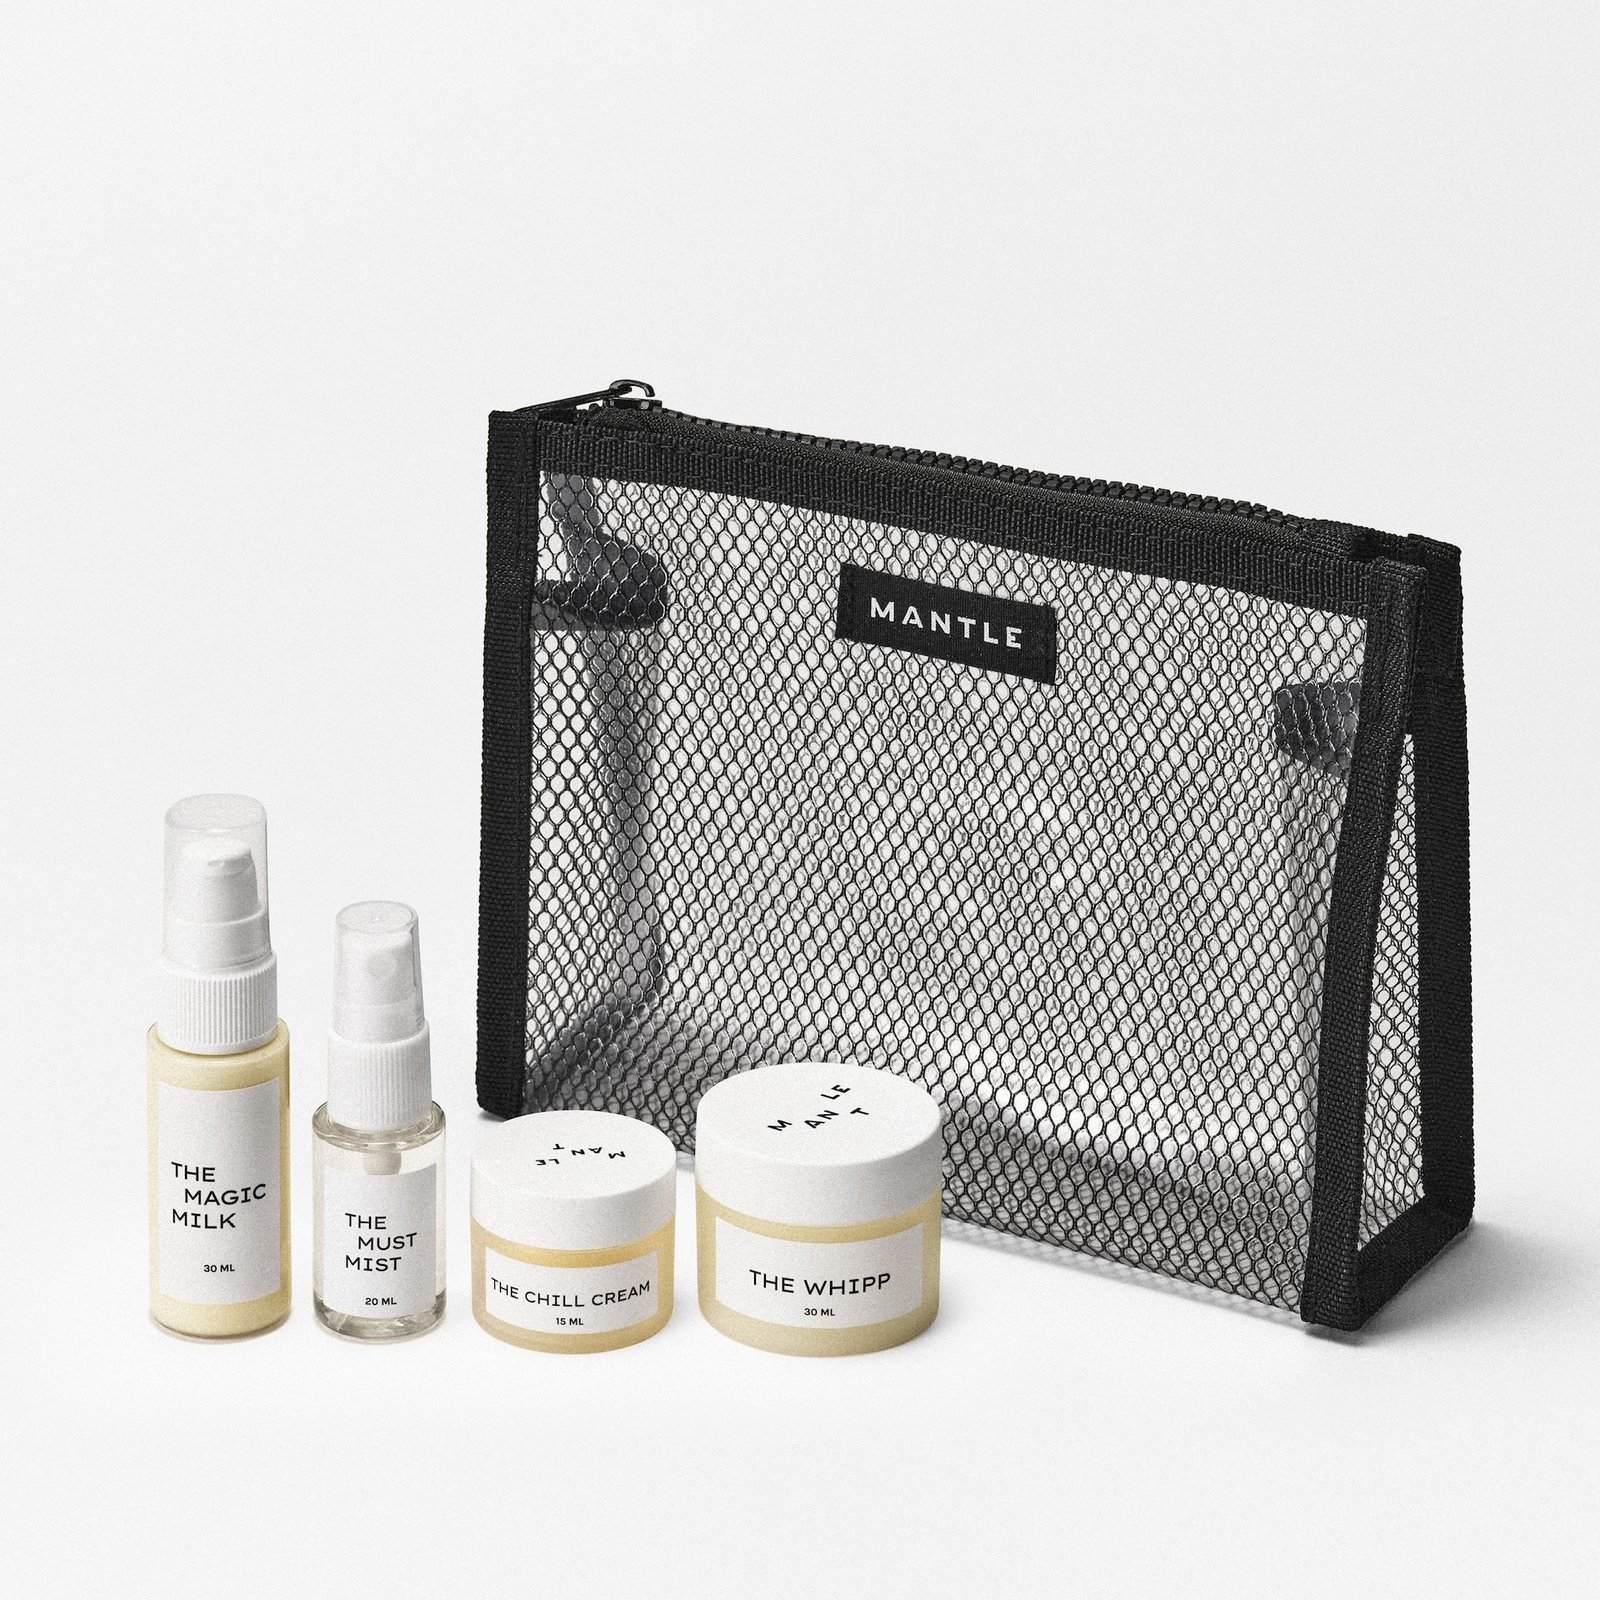 Mantle The Discovery Kit – Travel mini